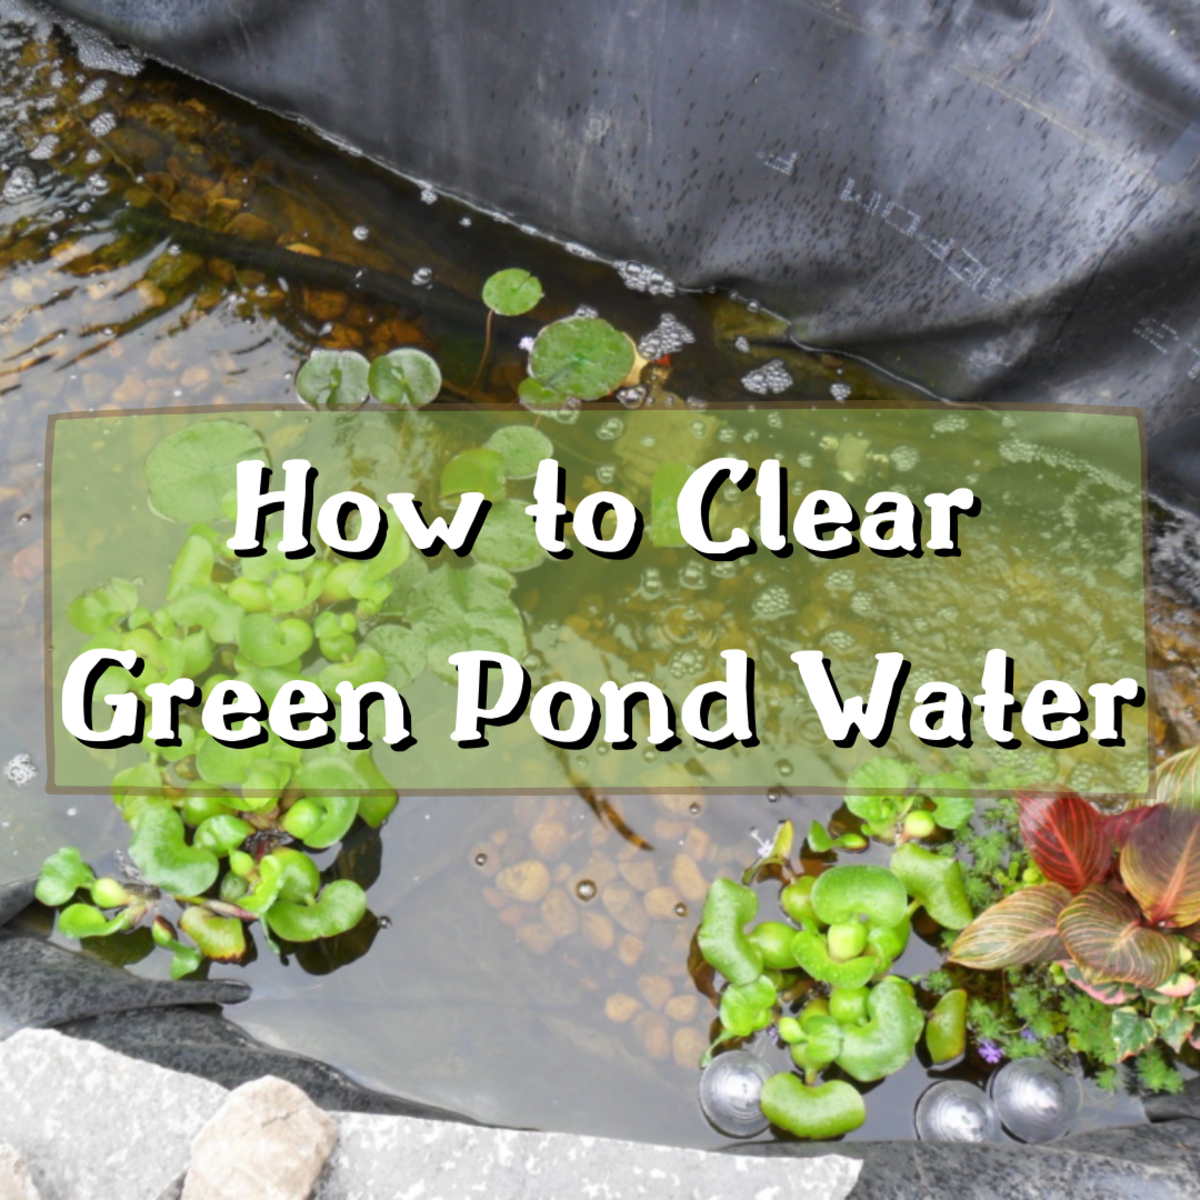 How to Clear Green Pond Water